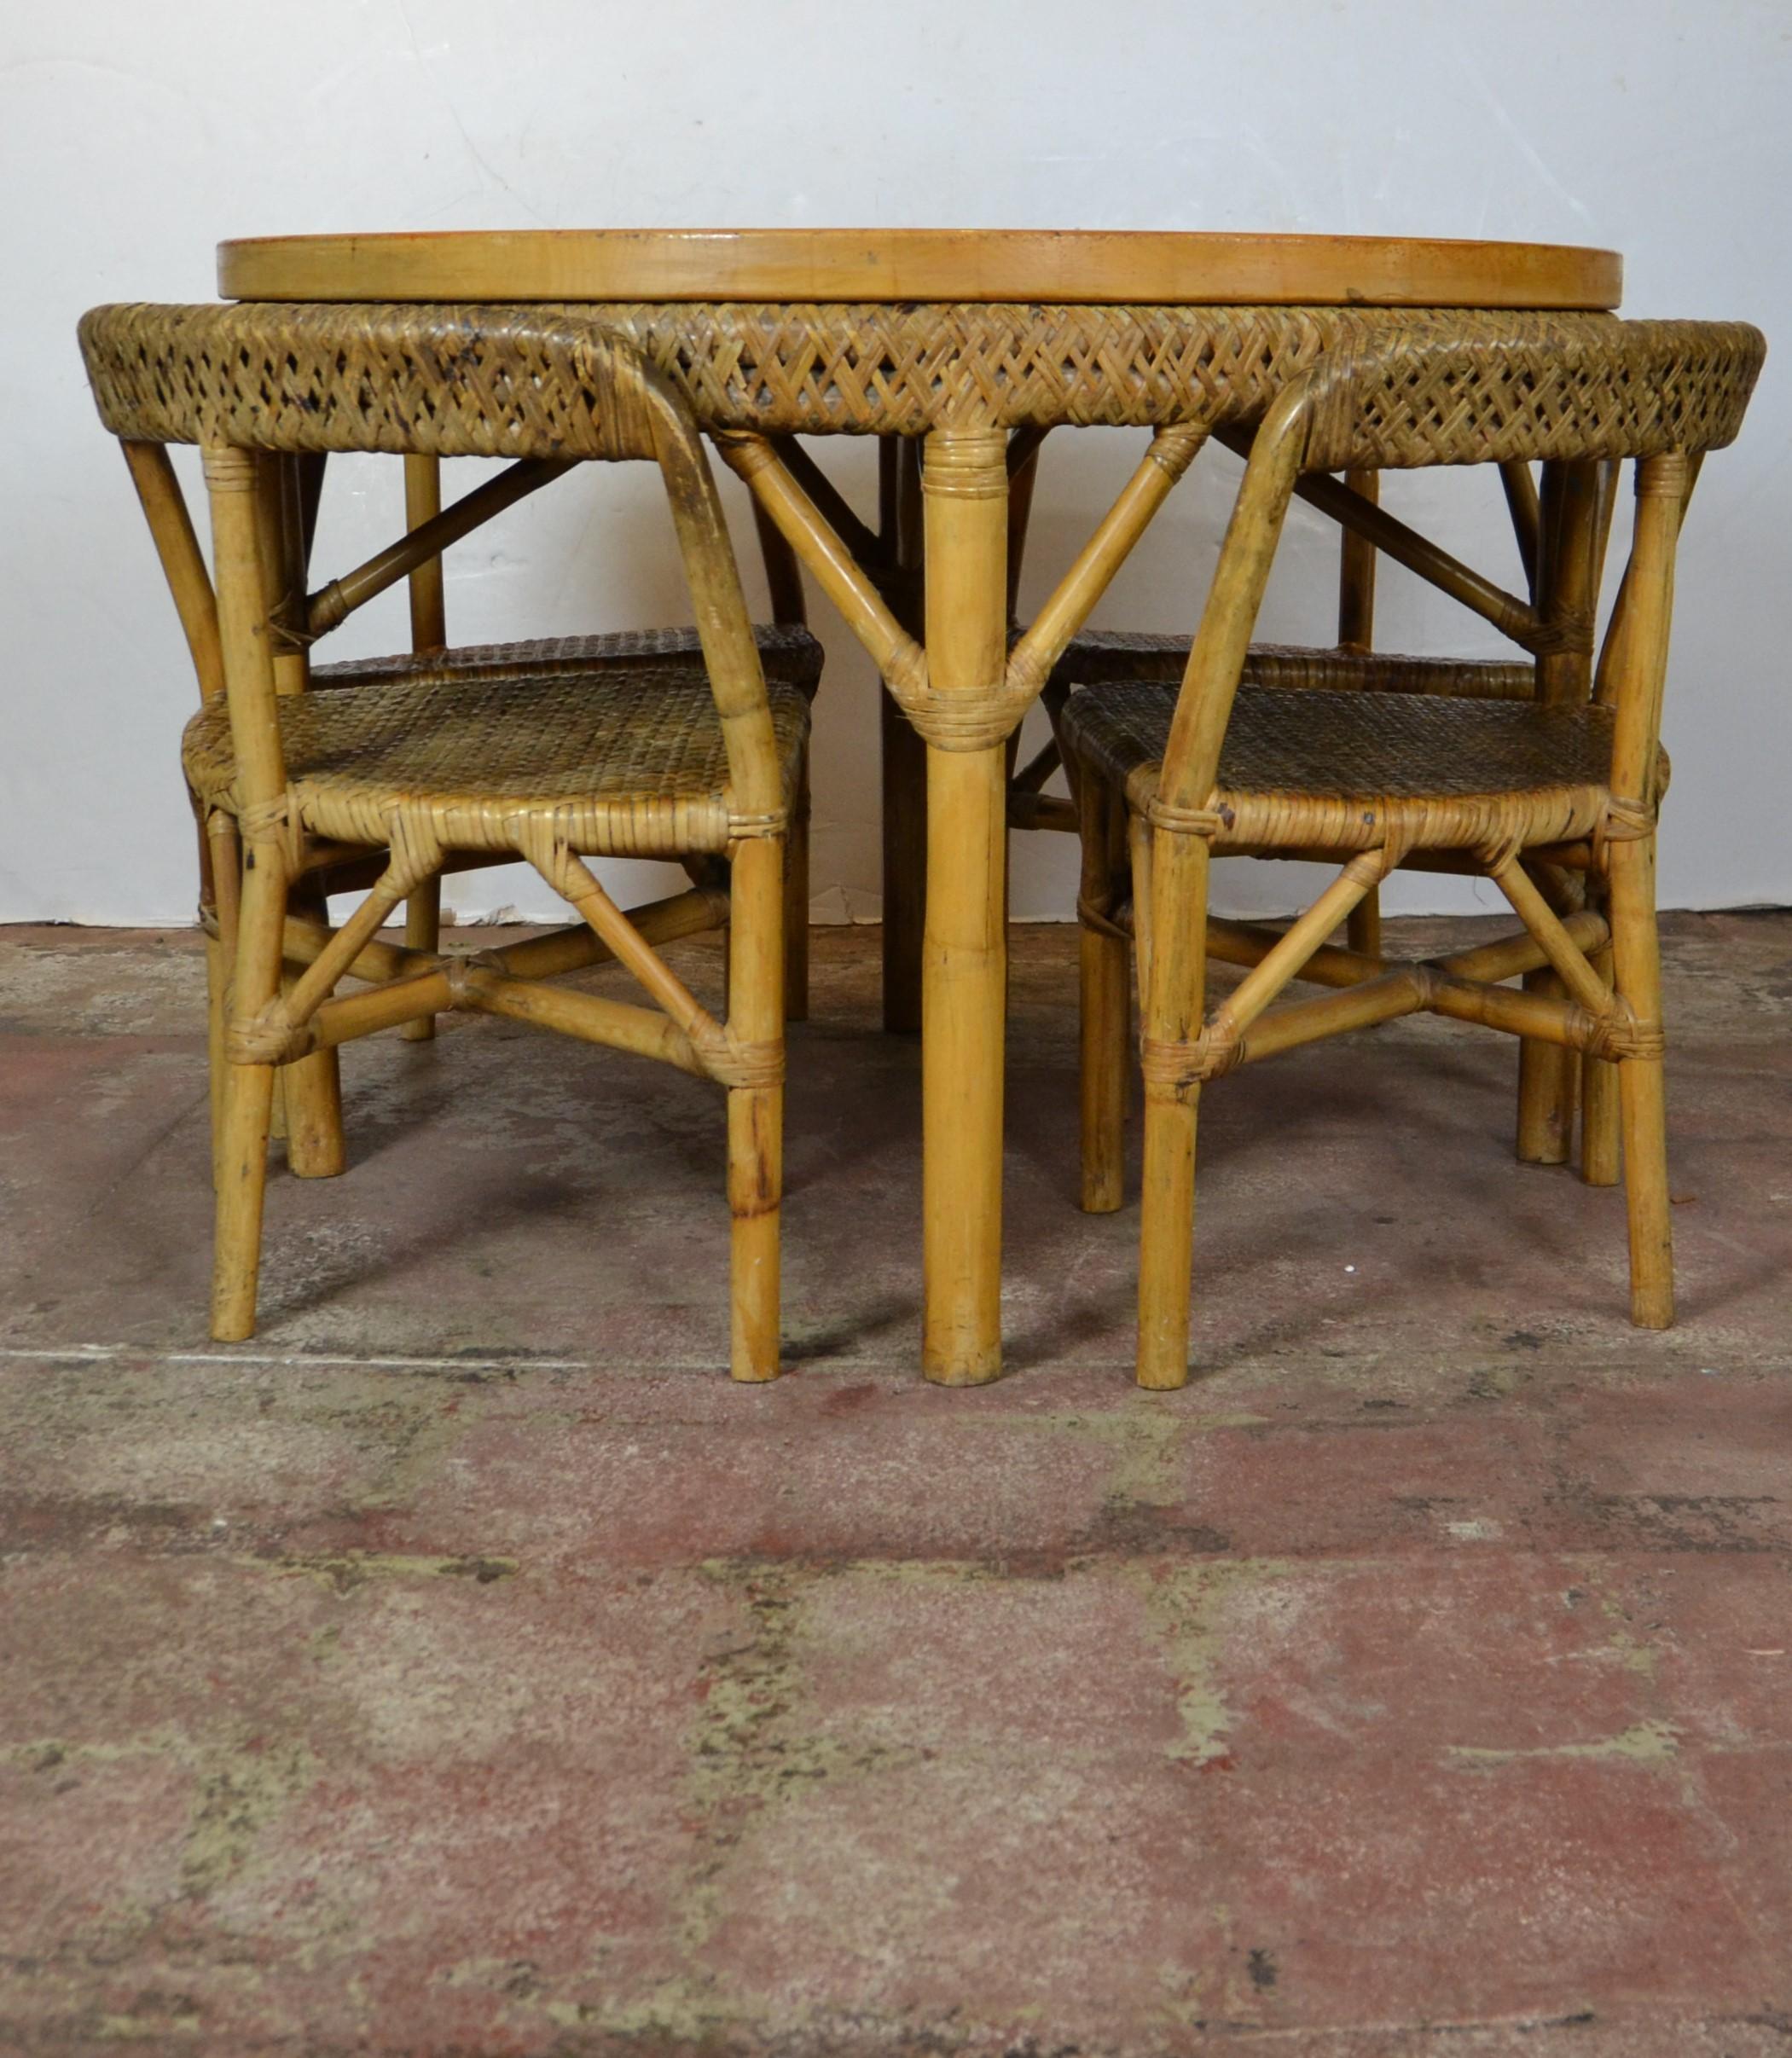 The set compromised of four three-legged, woven seat, woven back fit the shape of the table giving it a clean look. The top of the table is marquetry solid wood. Measures: Table 42